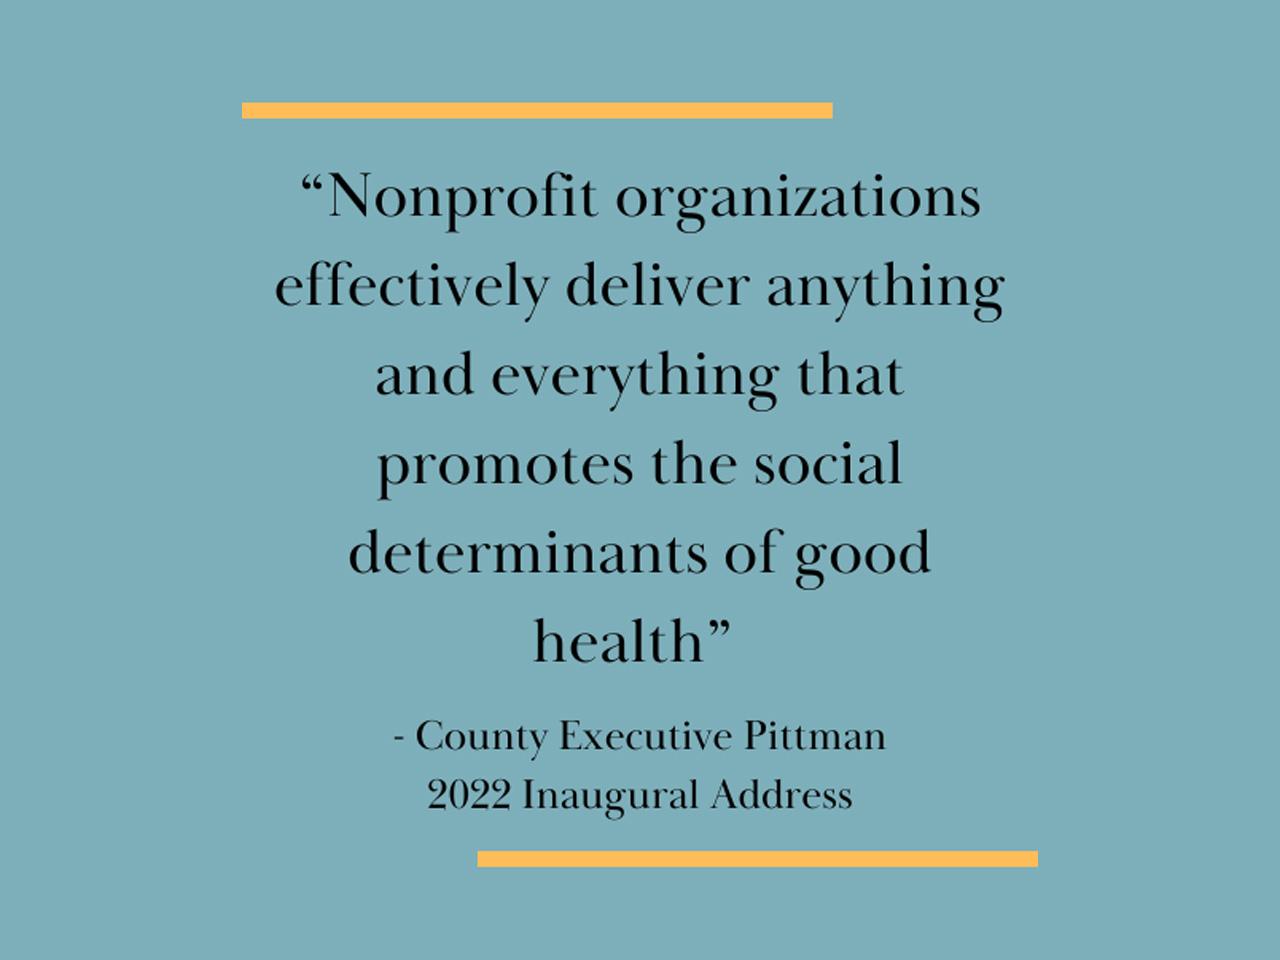 A quote reading: "Nonprofit organizations effectively deliver anything and everything that promotes the social determinants of good health" Quoted by County Executive Pittman, 2022 Inaugural Address